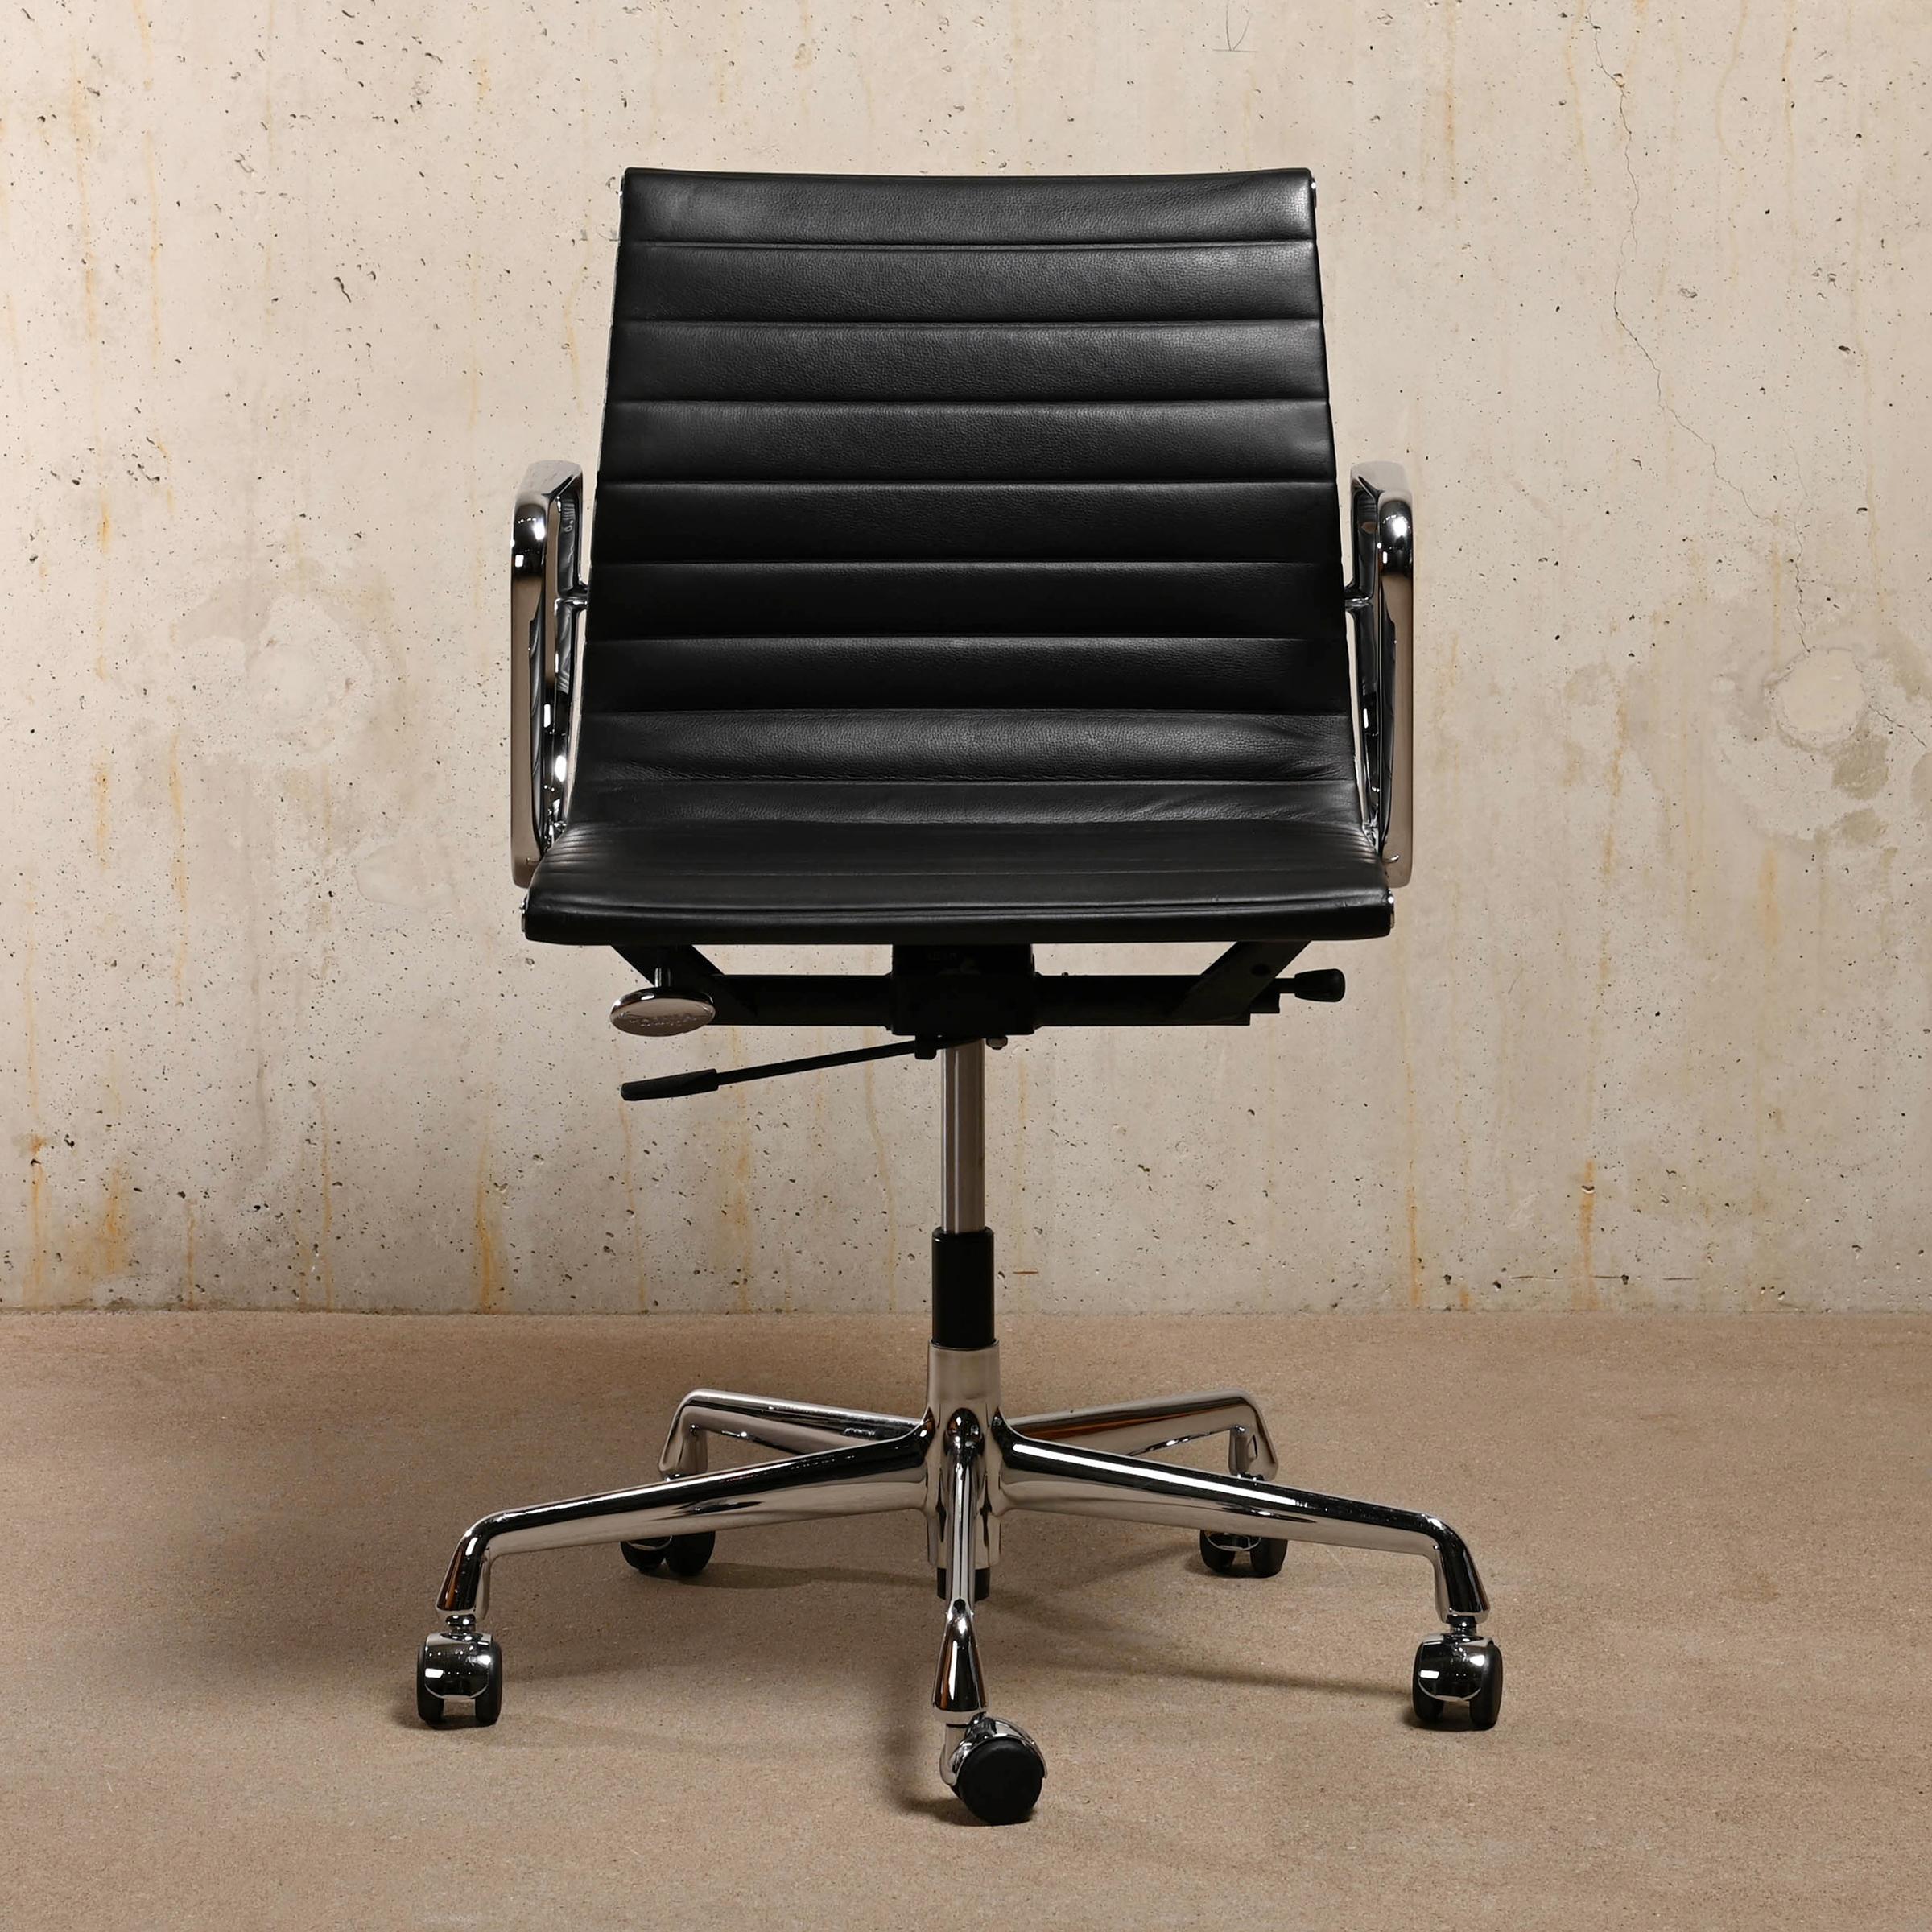 Iconic office chair EA117 belonging to the famous Aluminum Series designed by Charles & Ray Eames for Herman Miller (US) / Vitra (EU). Exceptional comfort is guaranteed with the height adjustment and tilt/swivel mechanism, which can be adjusted to